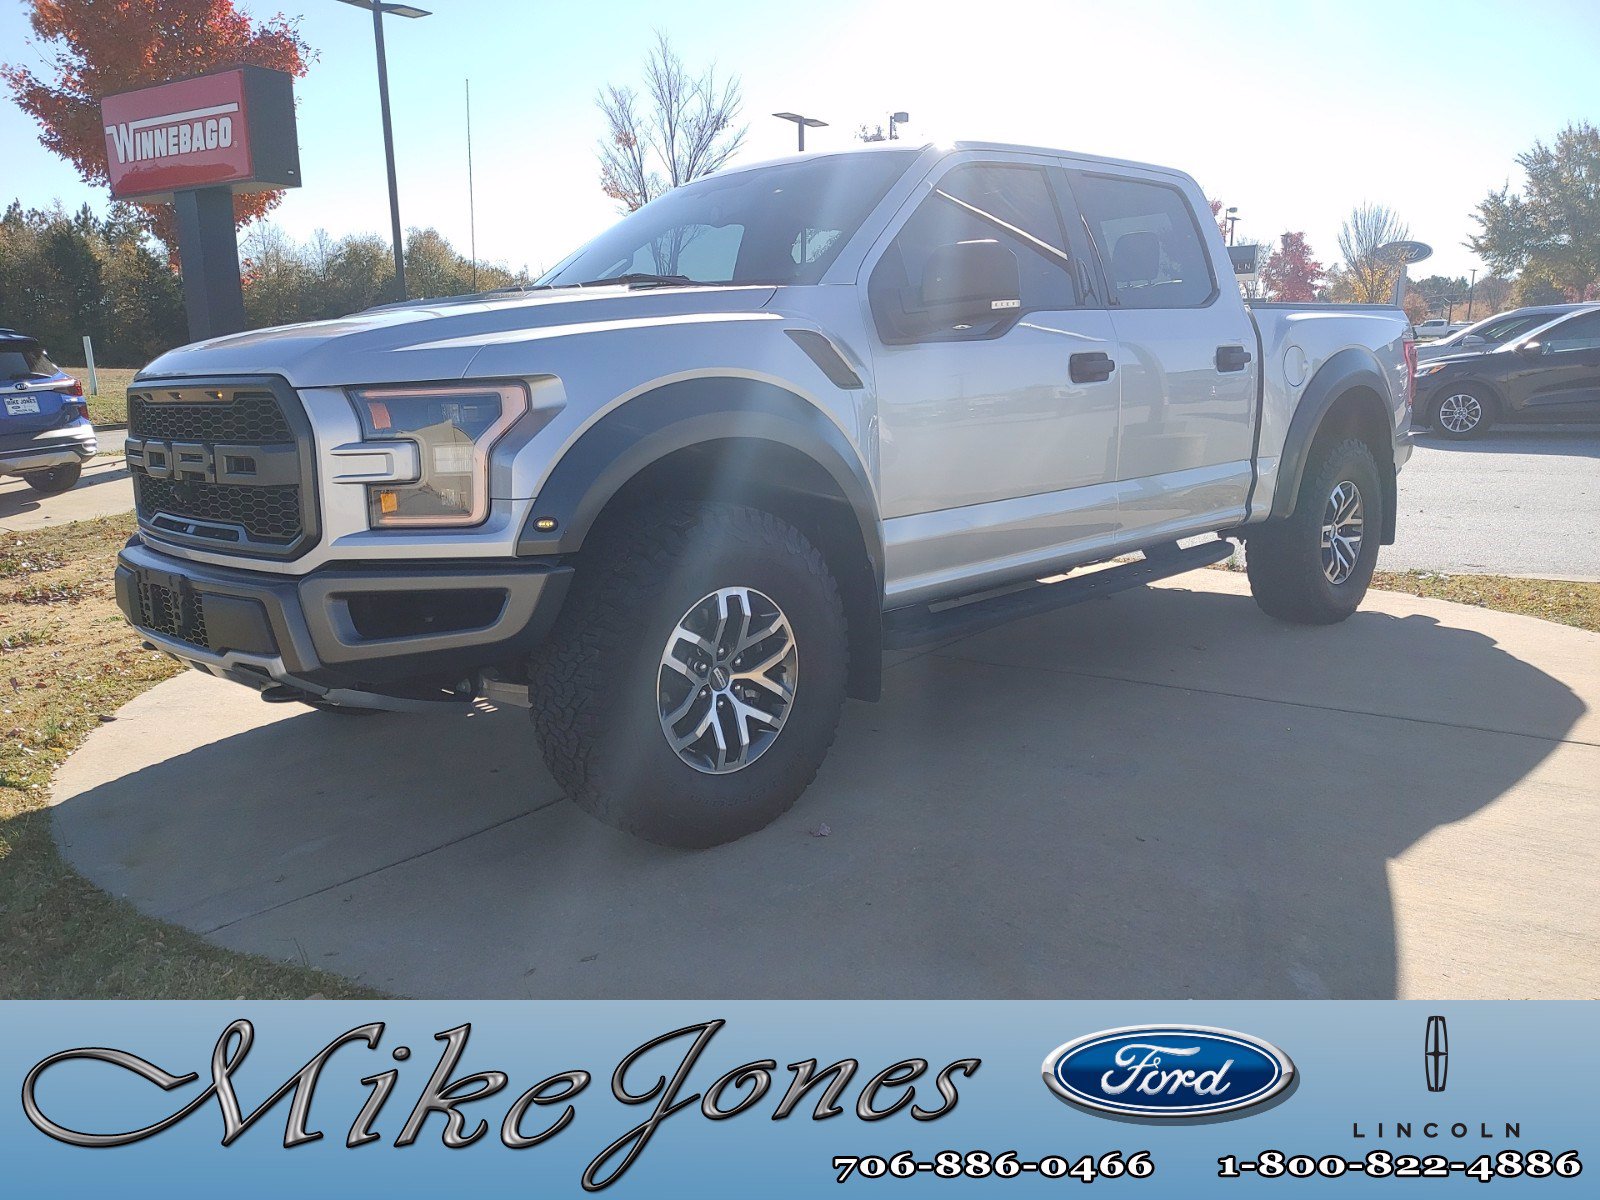 2018 Ford F-150 Crew Cab Short Bed Truck 